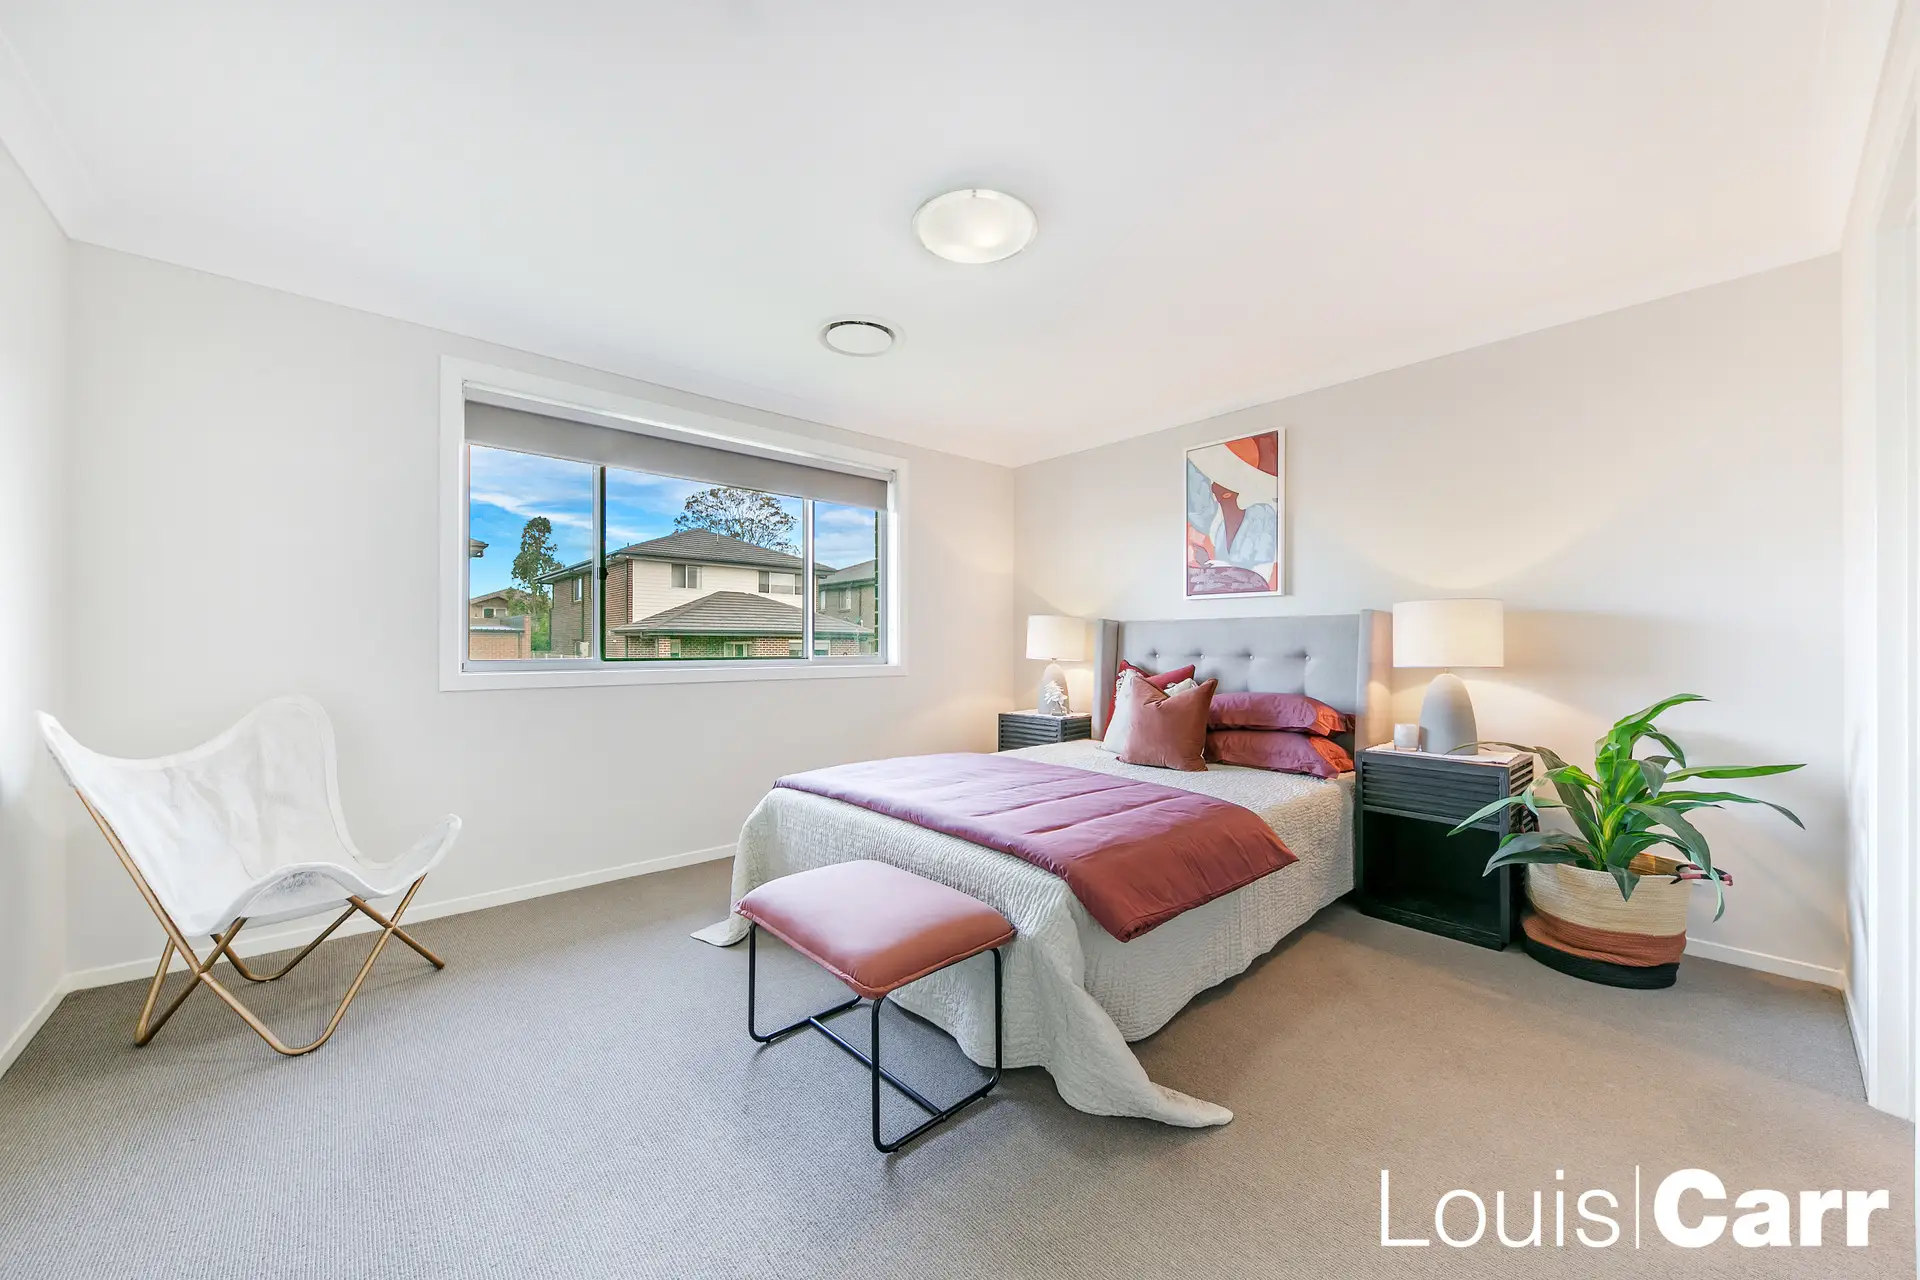 Photo #12: 4 Carisbrook Street, North Kellyville - Sold by Louis Carr Real Estate